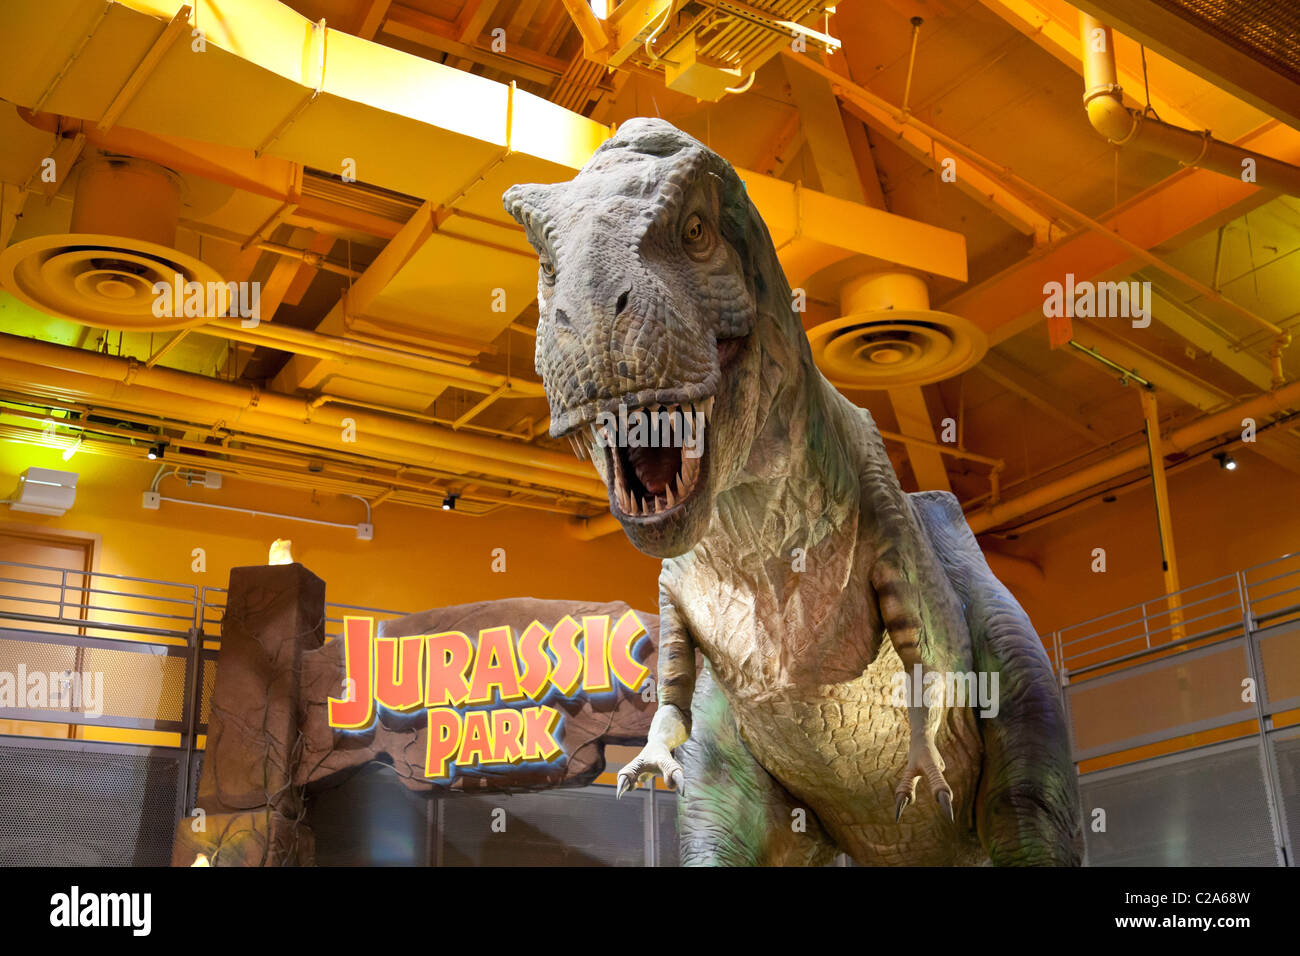 Toys R Us, Jurassic Park T-Rex Robot, Times Square, NYC Stock Photo - Alamy